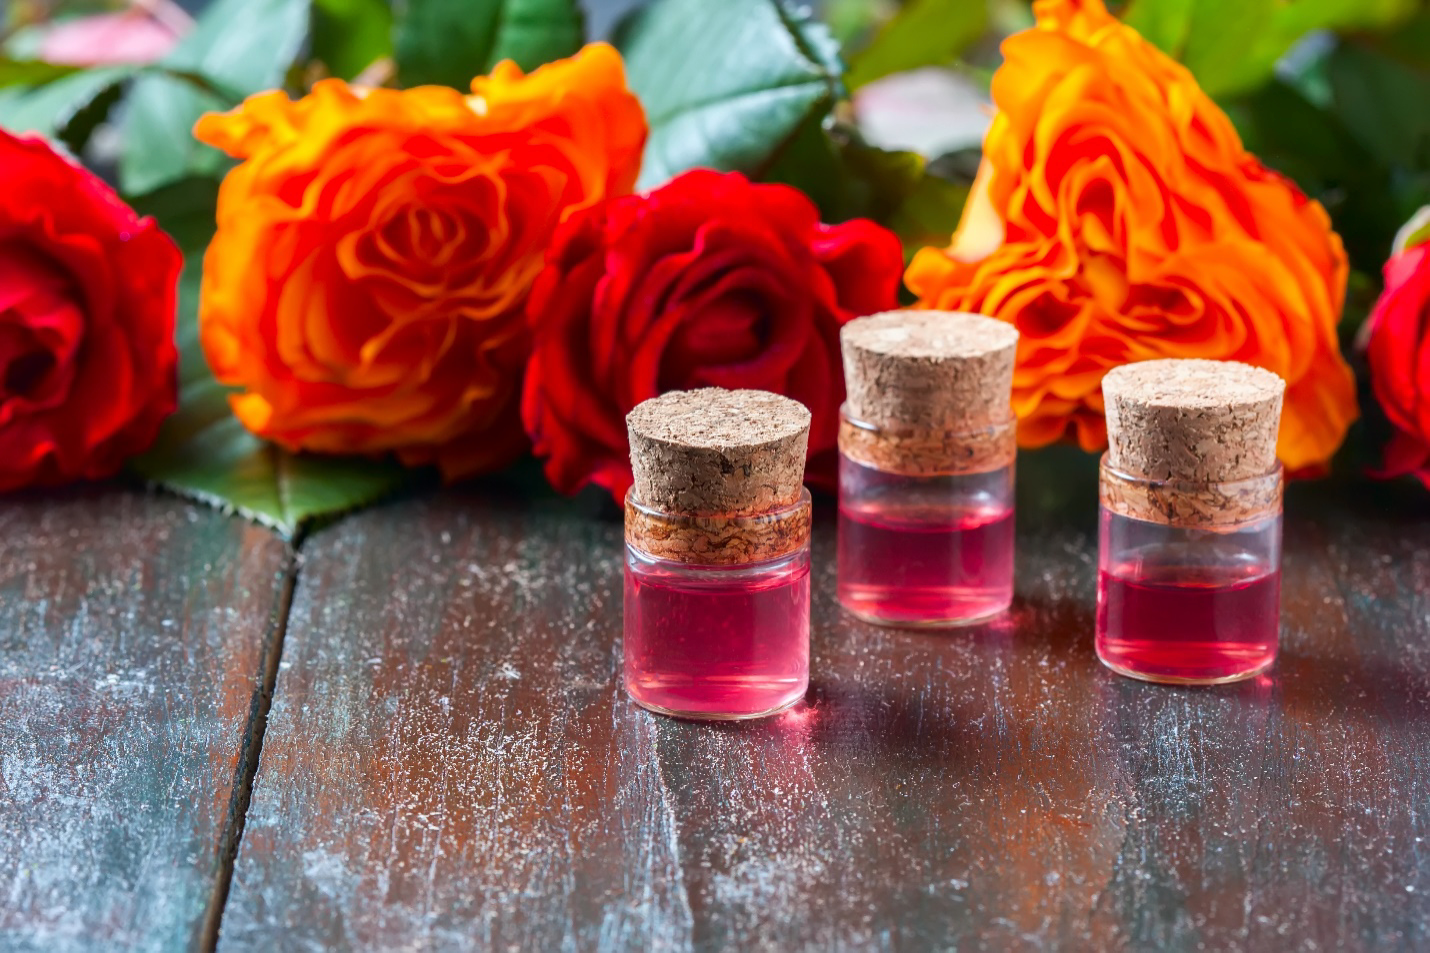 THE BENEFITS OF ROSE WATER ON LOCS AND LOOSE NATURAL HAIR